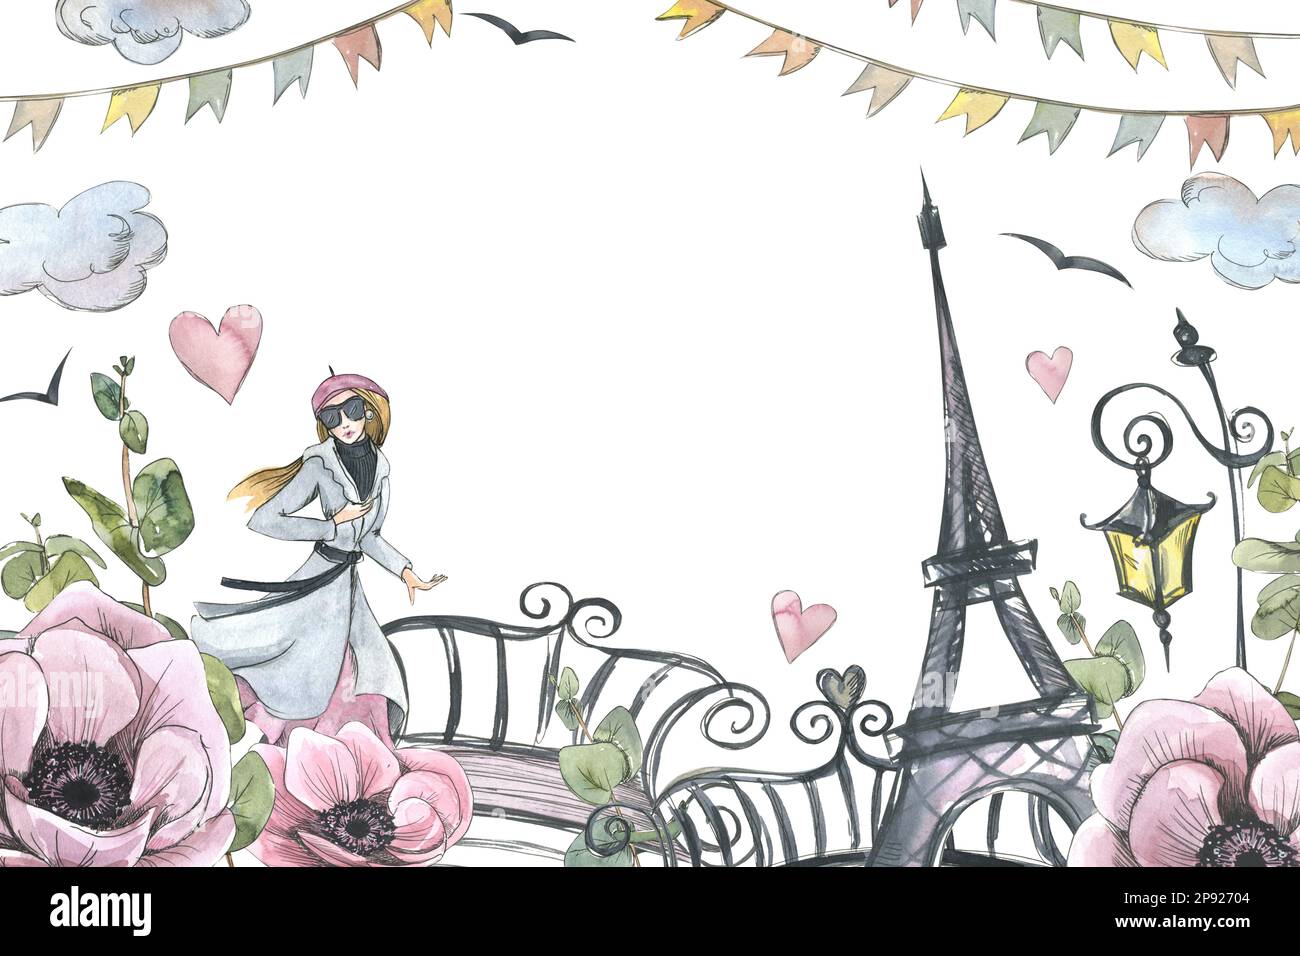 Eiffel Tower with girl, lantern, bridge and flowers. Watercolor illustration in sketch style with graphic elements. Template from the PARIS collection Stock Photo